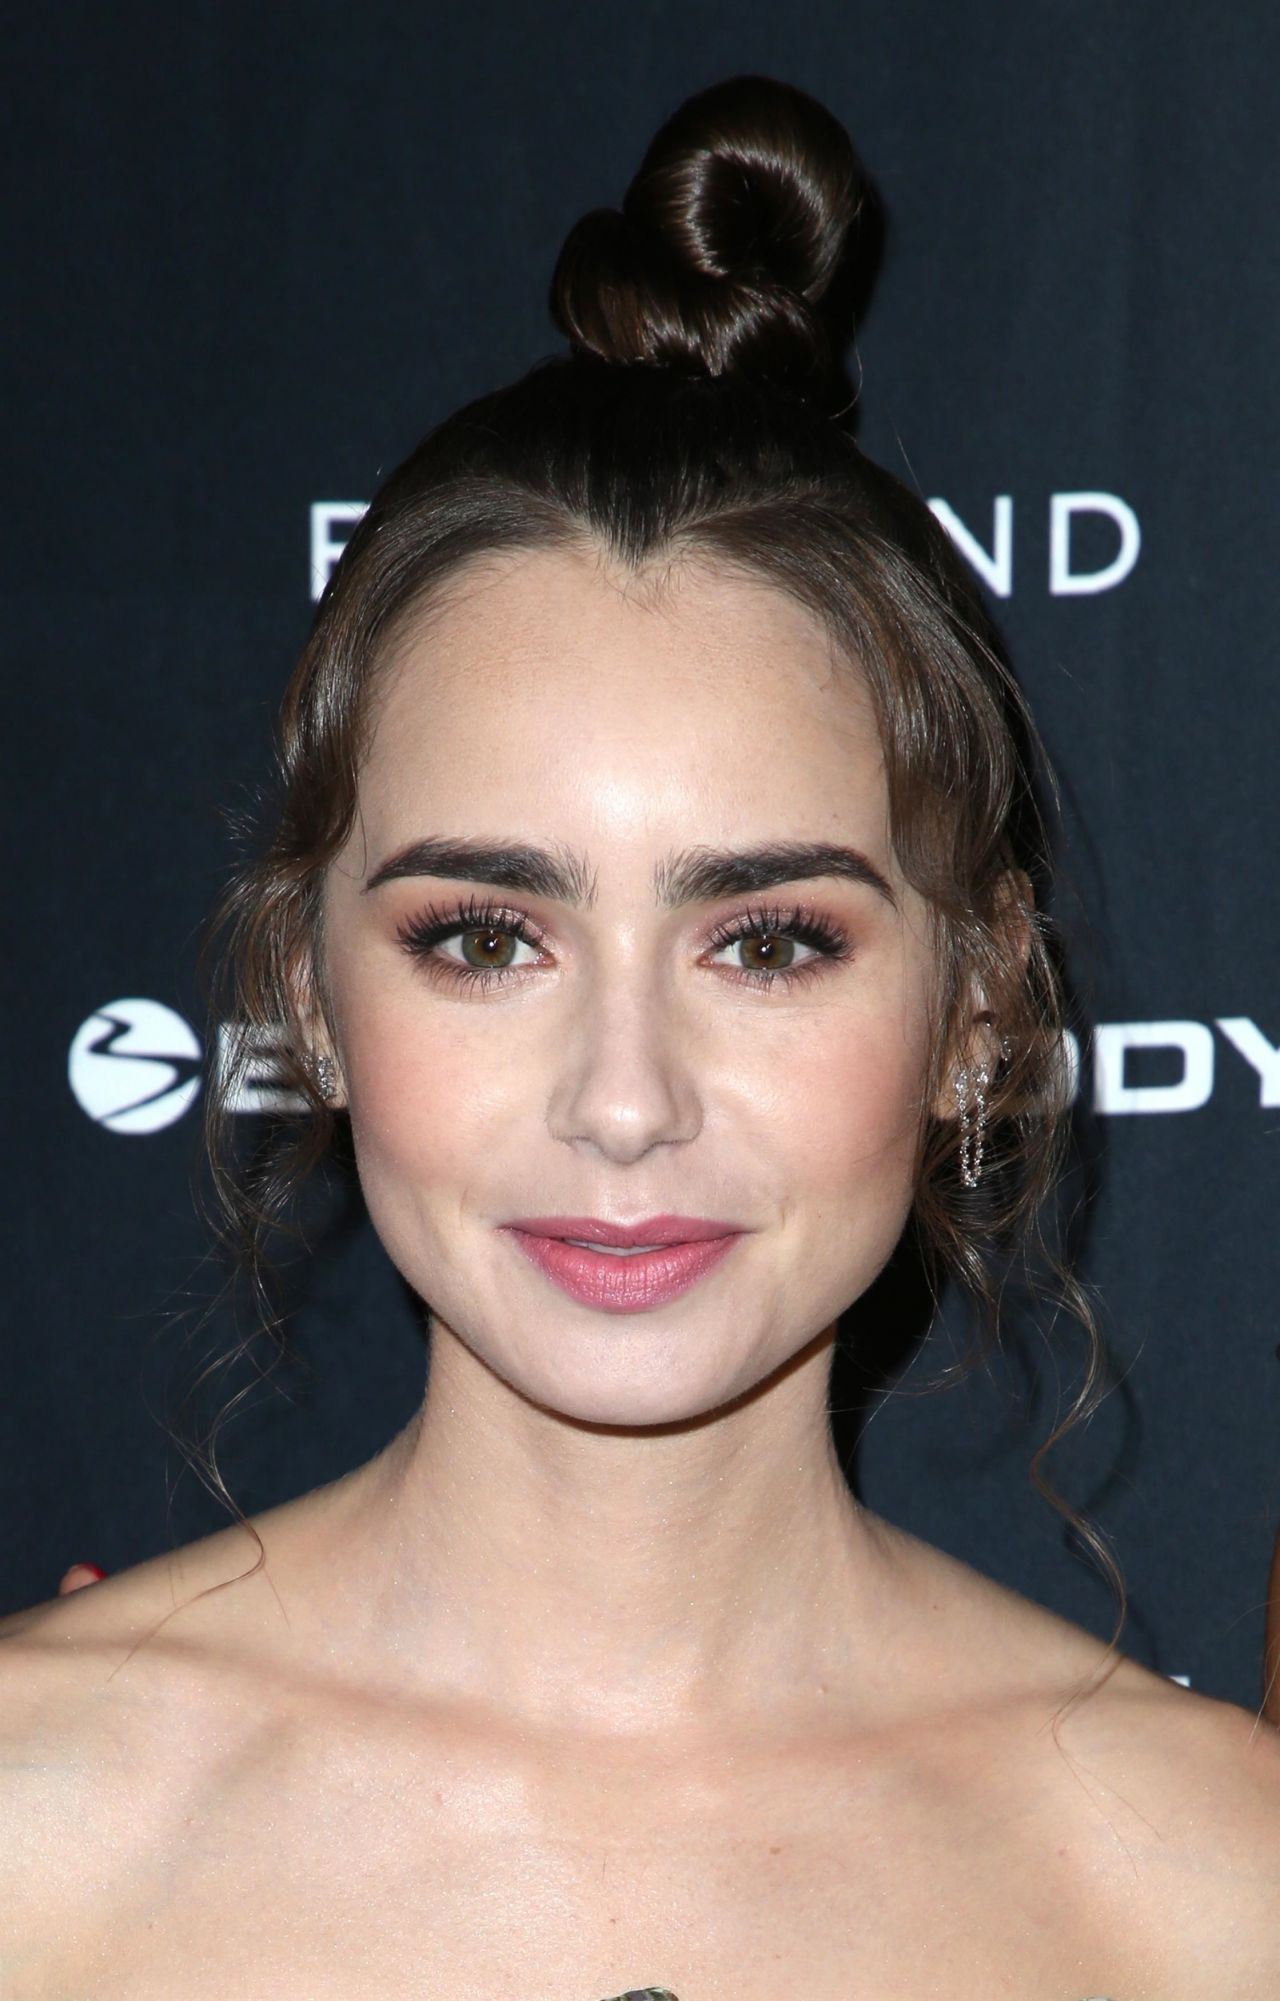 lily-collins-go-campaign-gala-in-los-angeles-10-20-2018-11.jpg